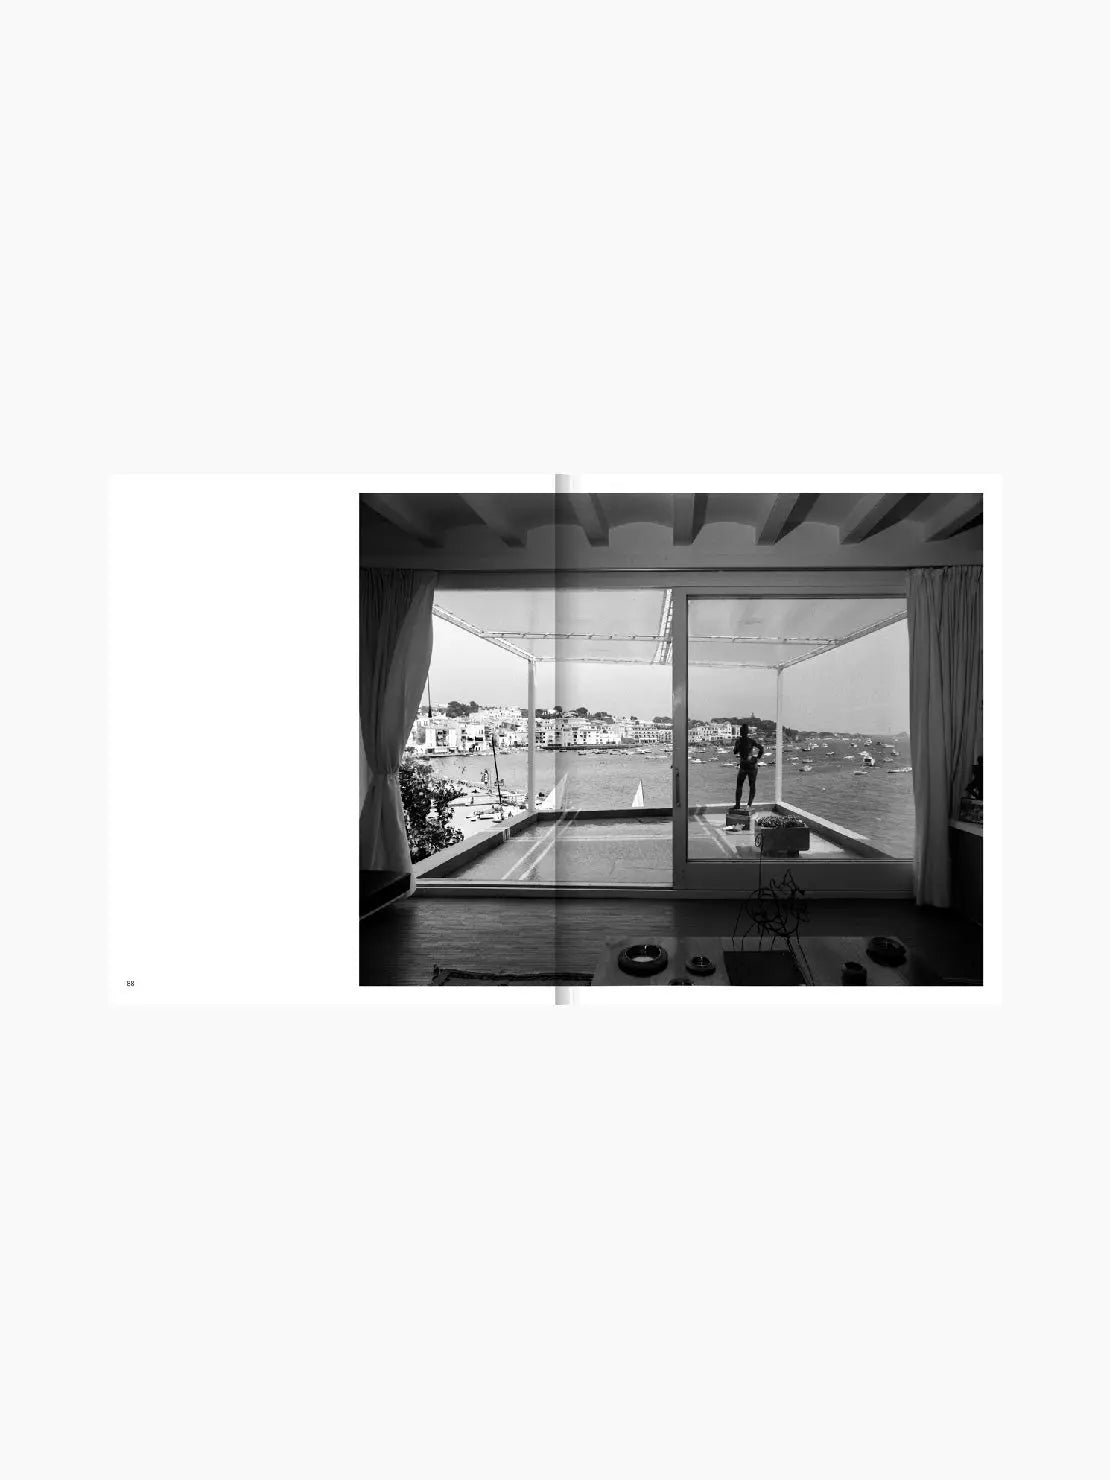 A book cover titled "The Modern Architecture of Cadaqués: 1955–71." The cover features a black and white photograph of a modern, minimalist living space with large windows. Published by Apartamento and available at Bassalstore, this edition resonates with the architectural elegance of nearby Barcelona.